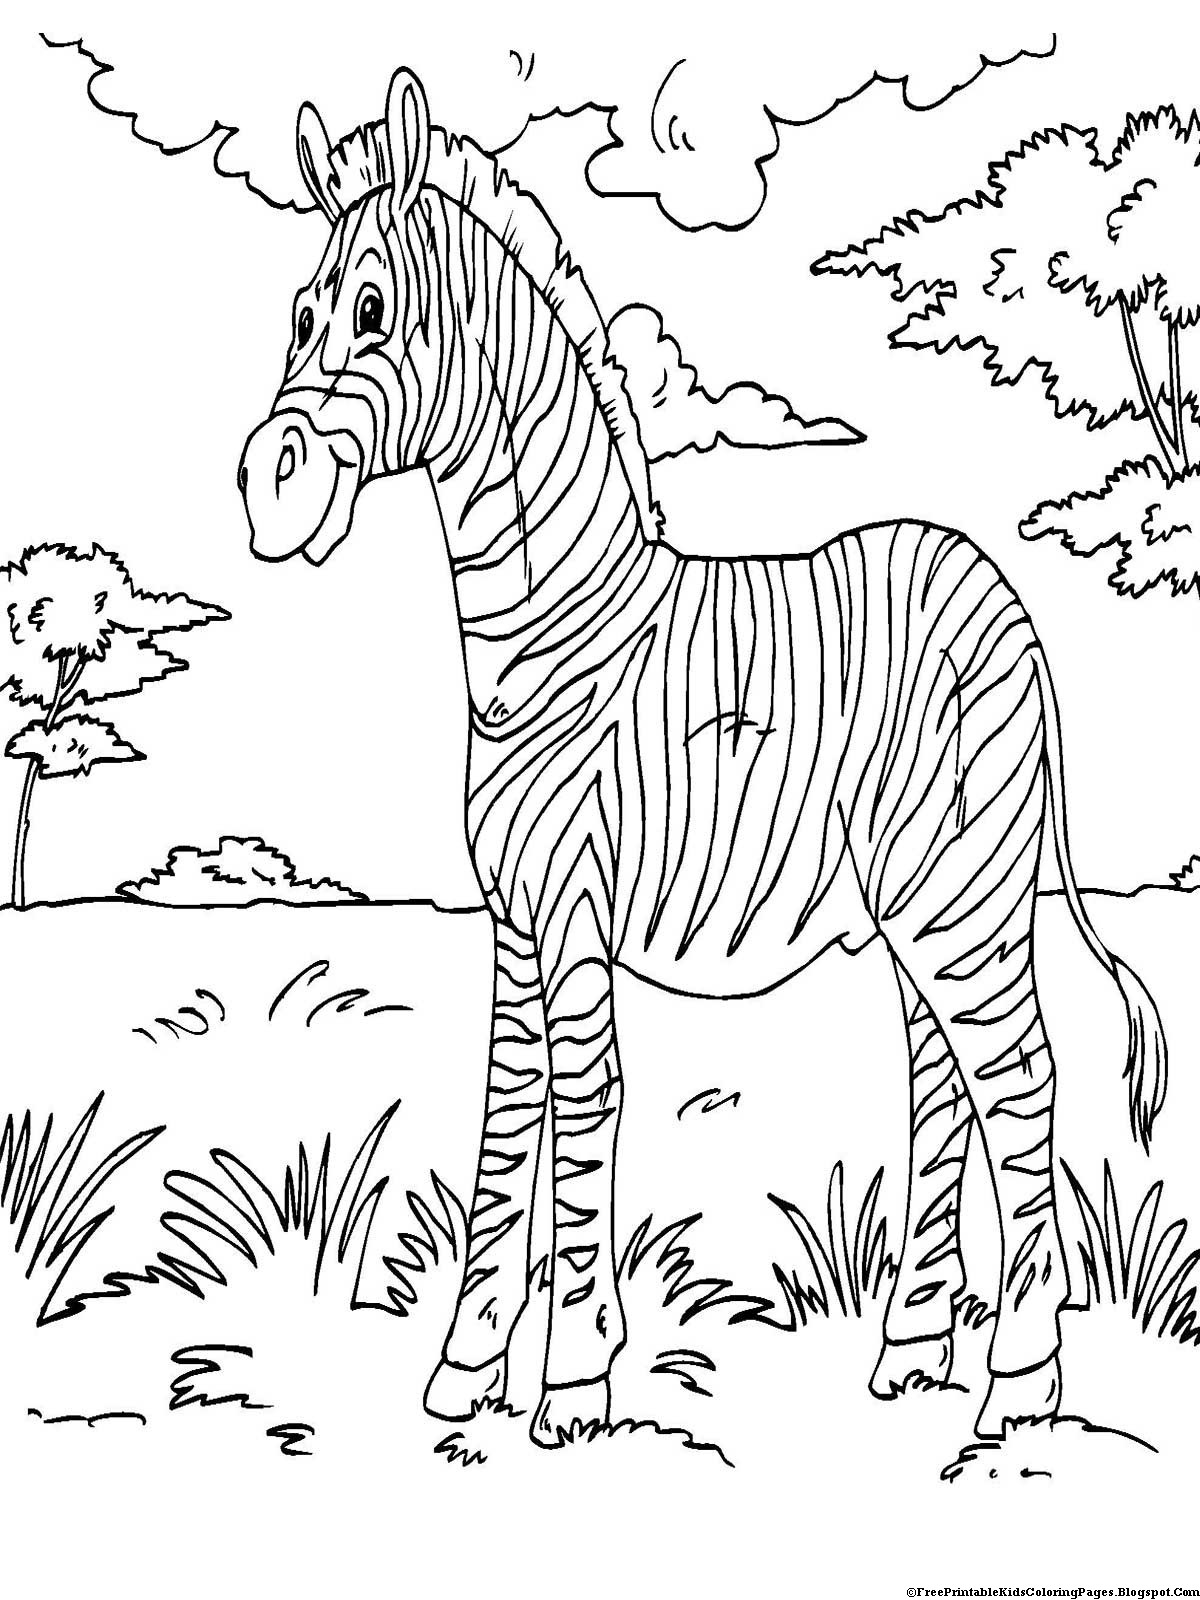 Free Printable Toddler Coloring Pages
 Zebra Coloring Pages Free Printable Kids Coloring Pages